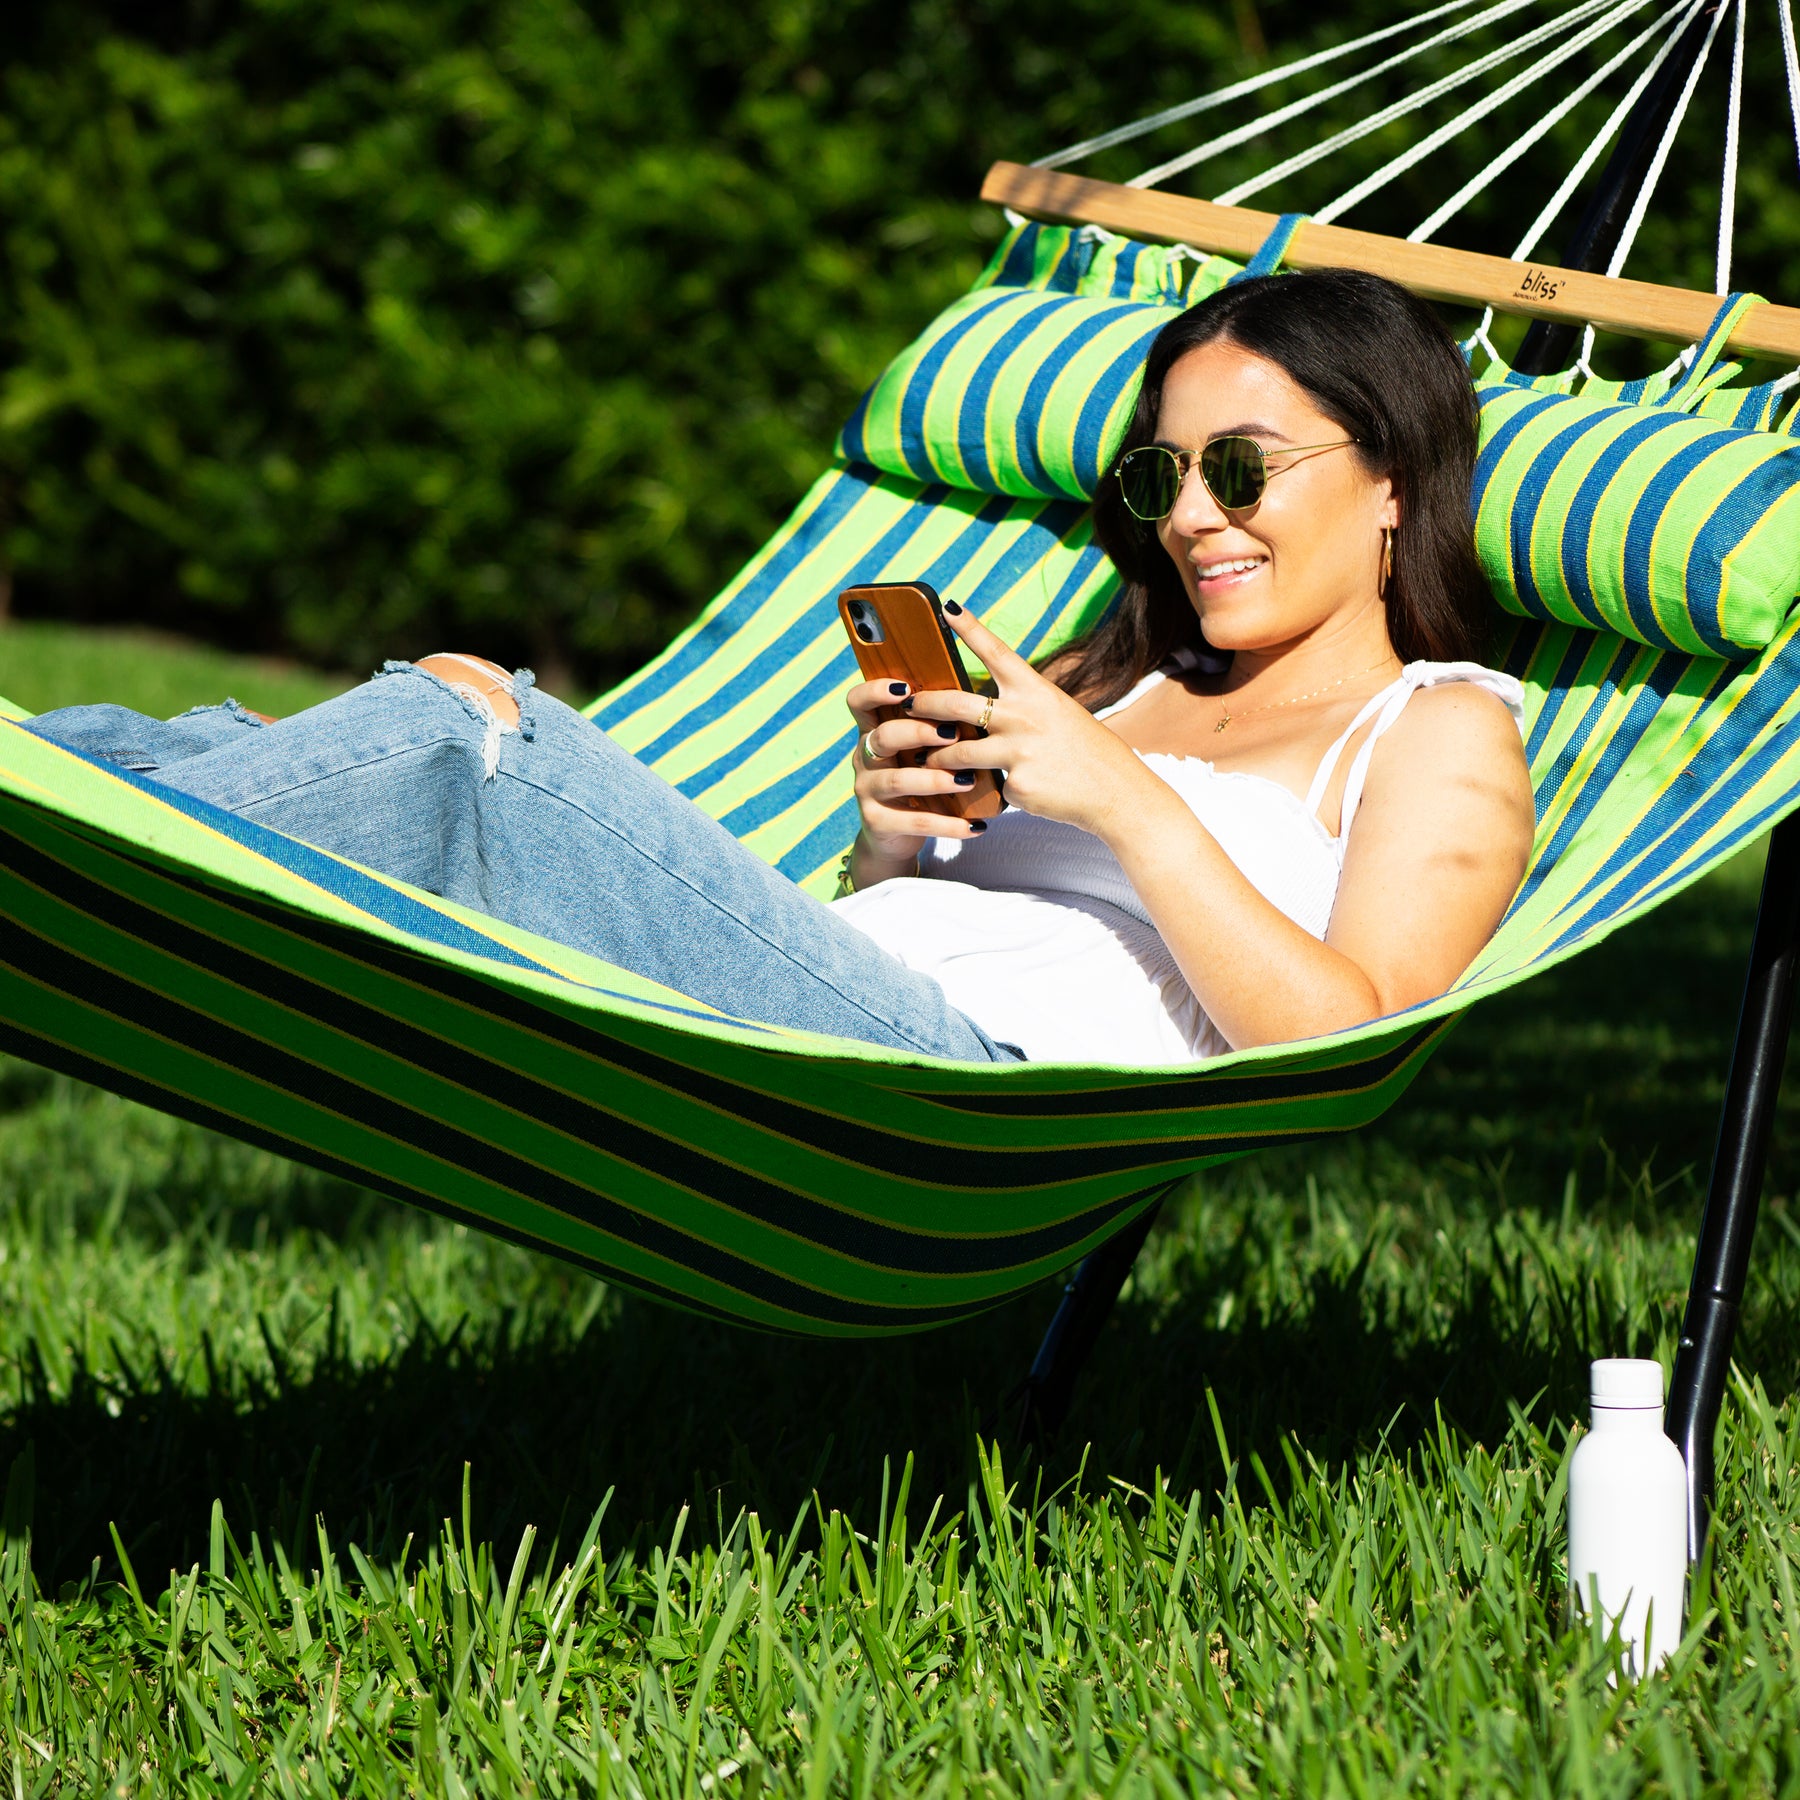 Woman wearing sunglasses is using her phone while relaxing on a sunny day outside in a Bliss Hammocks 48-inch Wide Caribbean Hammock.